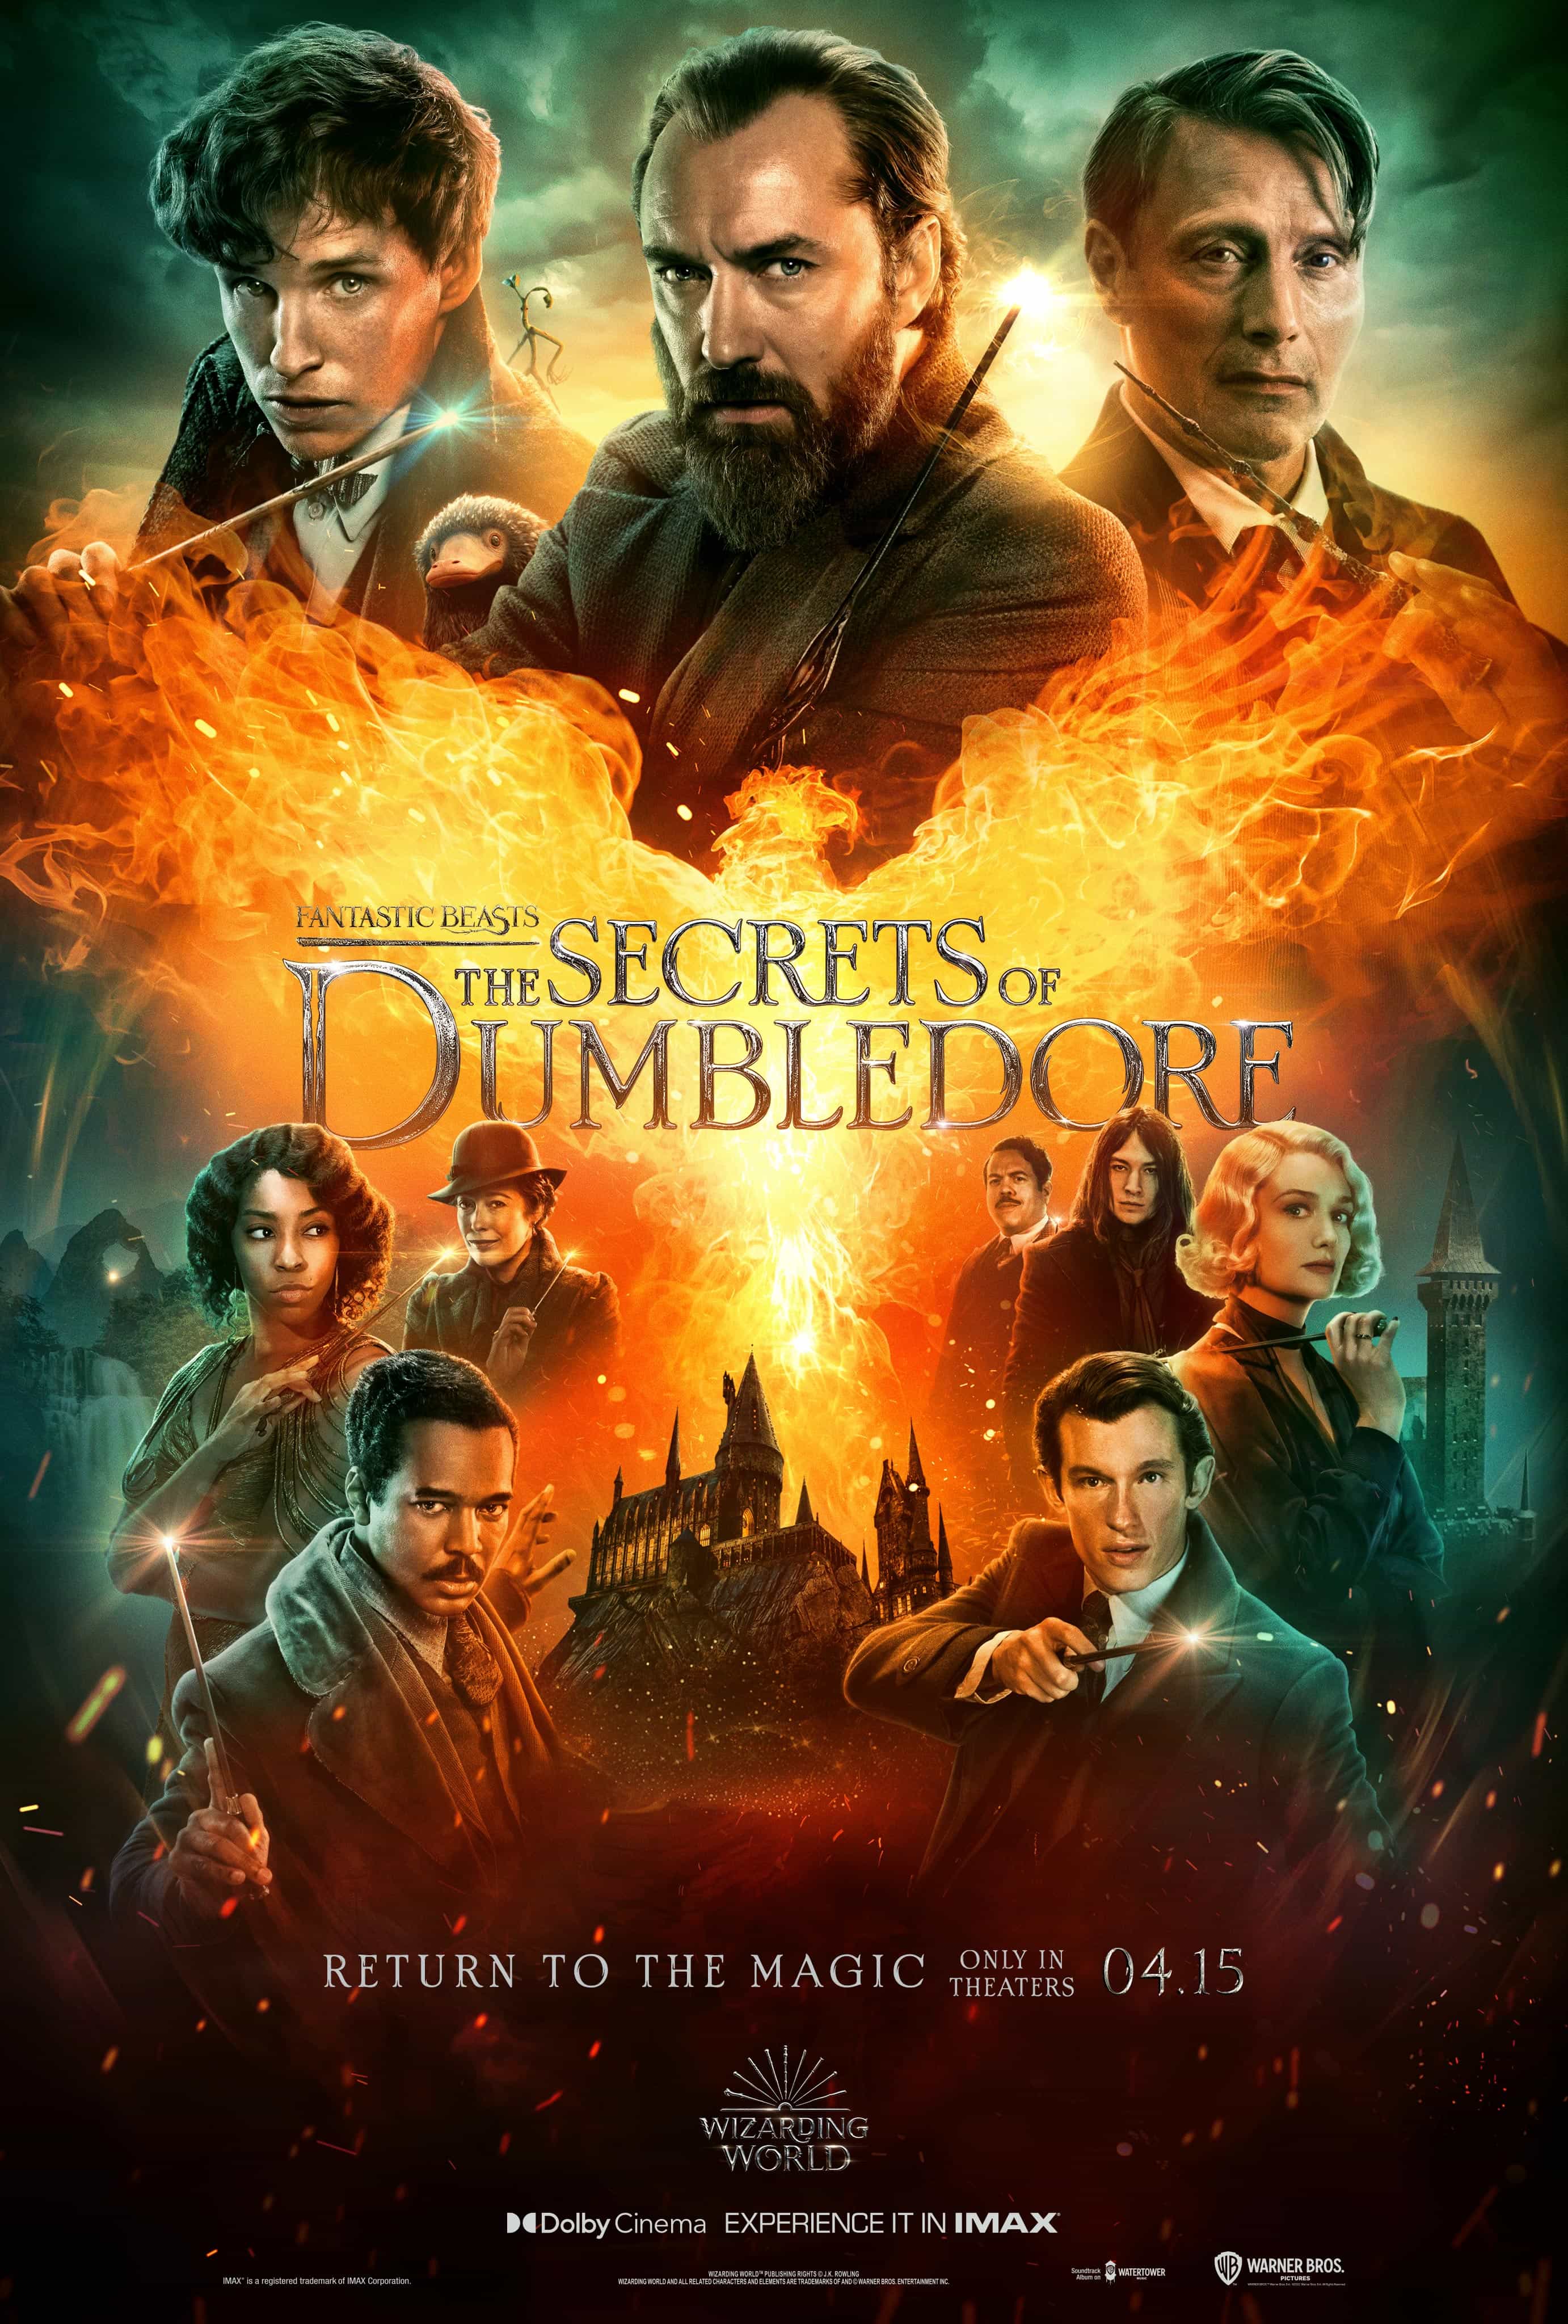 New poster released for Fantastic Beasts: The Secrets of Dumbledore which stars Eddie Redmayne - the movie is released 8th April 2022